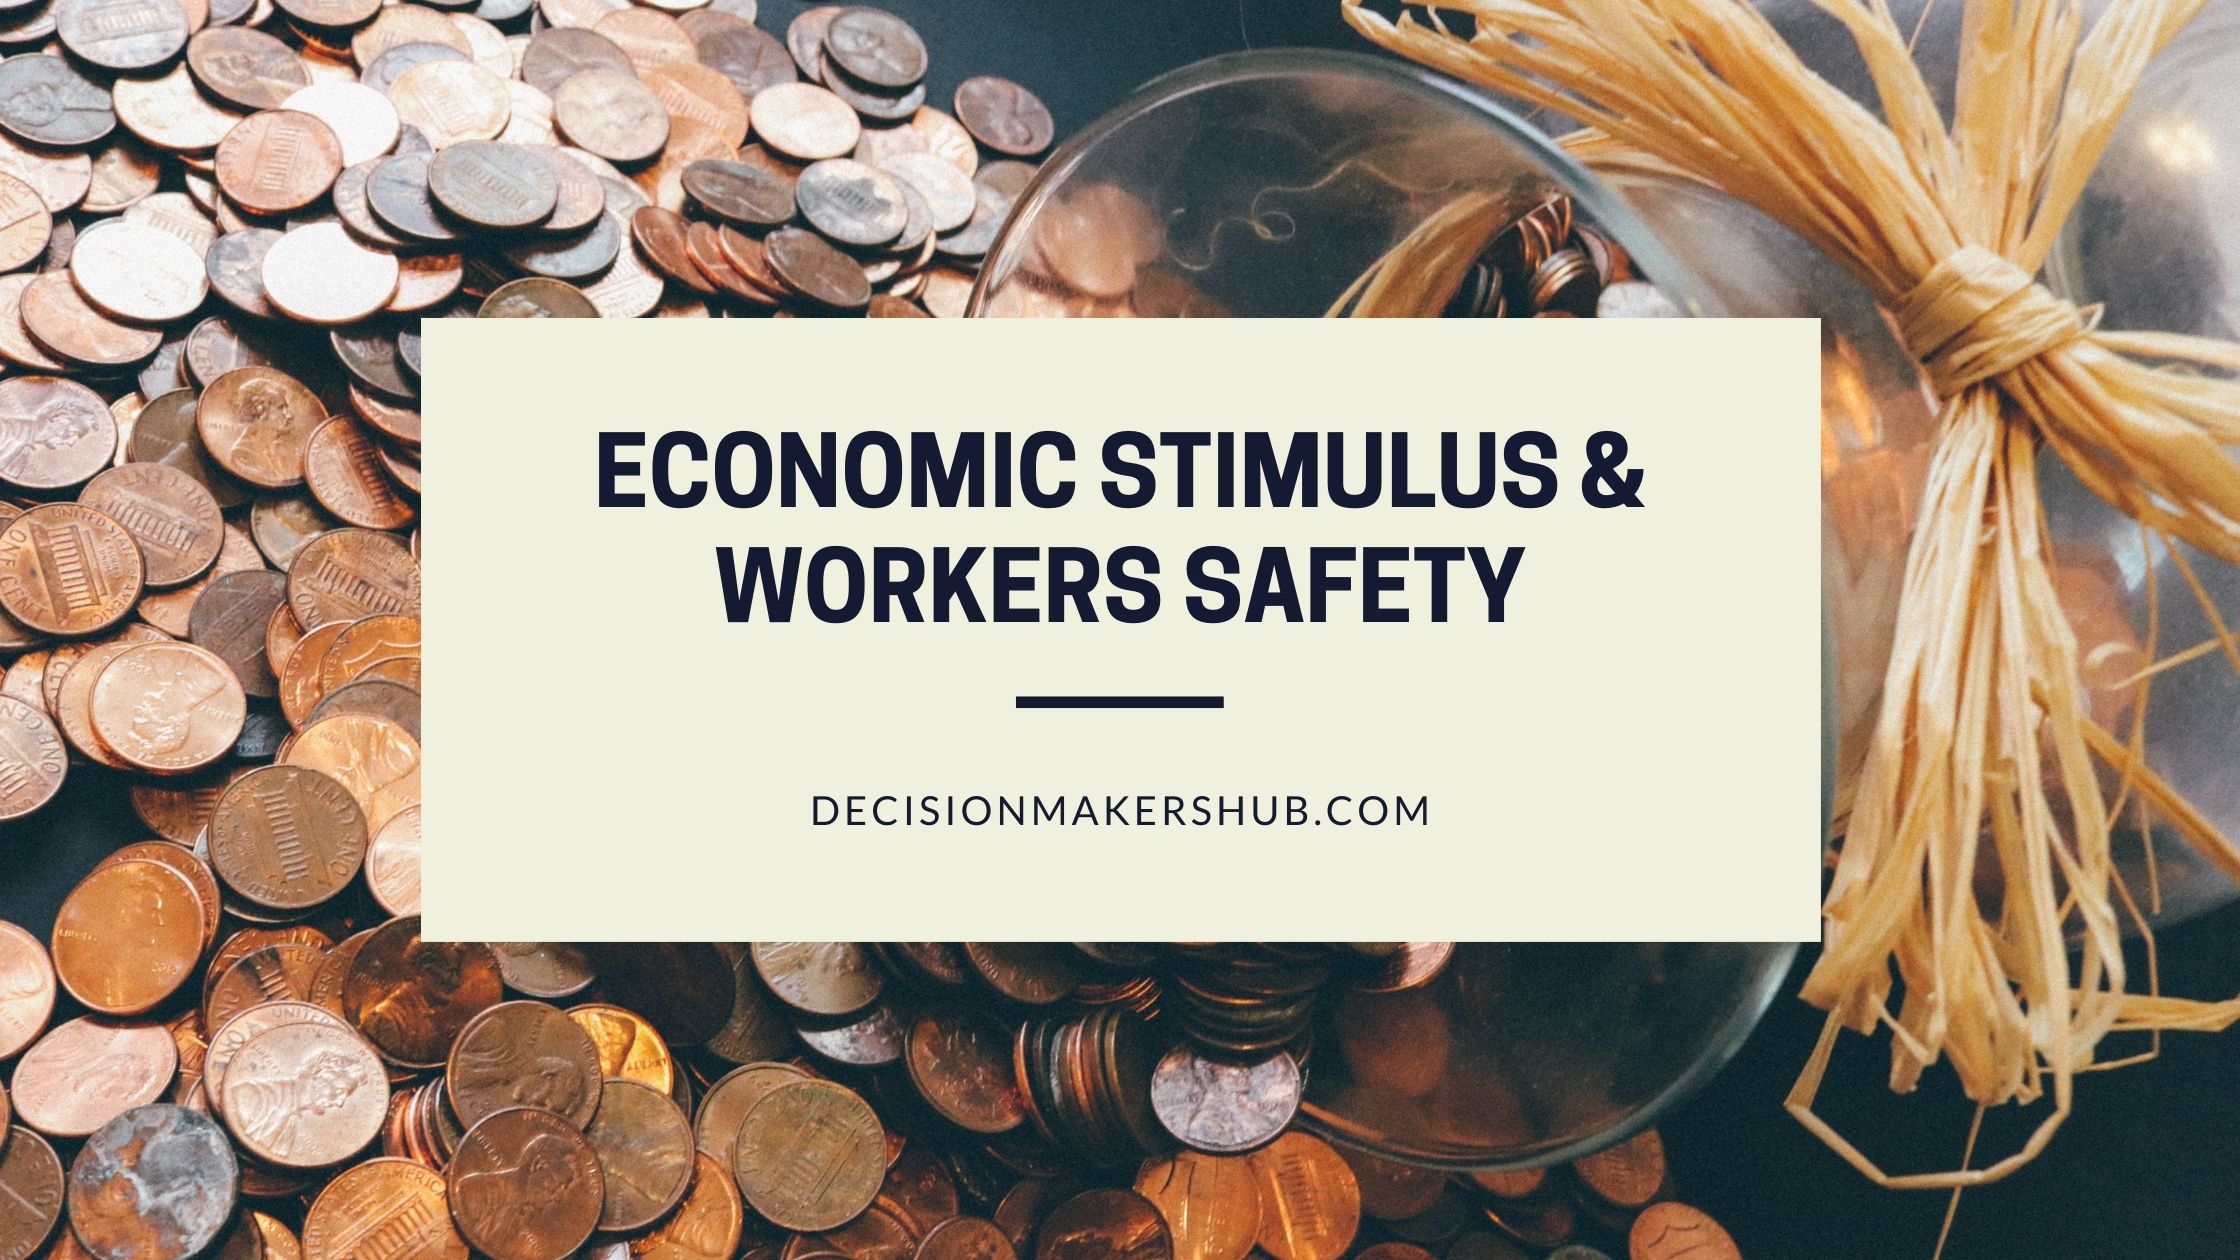 Economic stimulus & workers safety